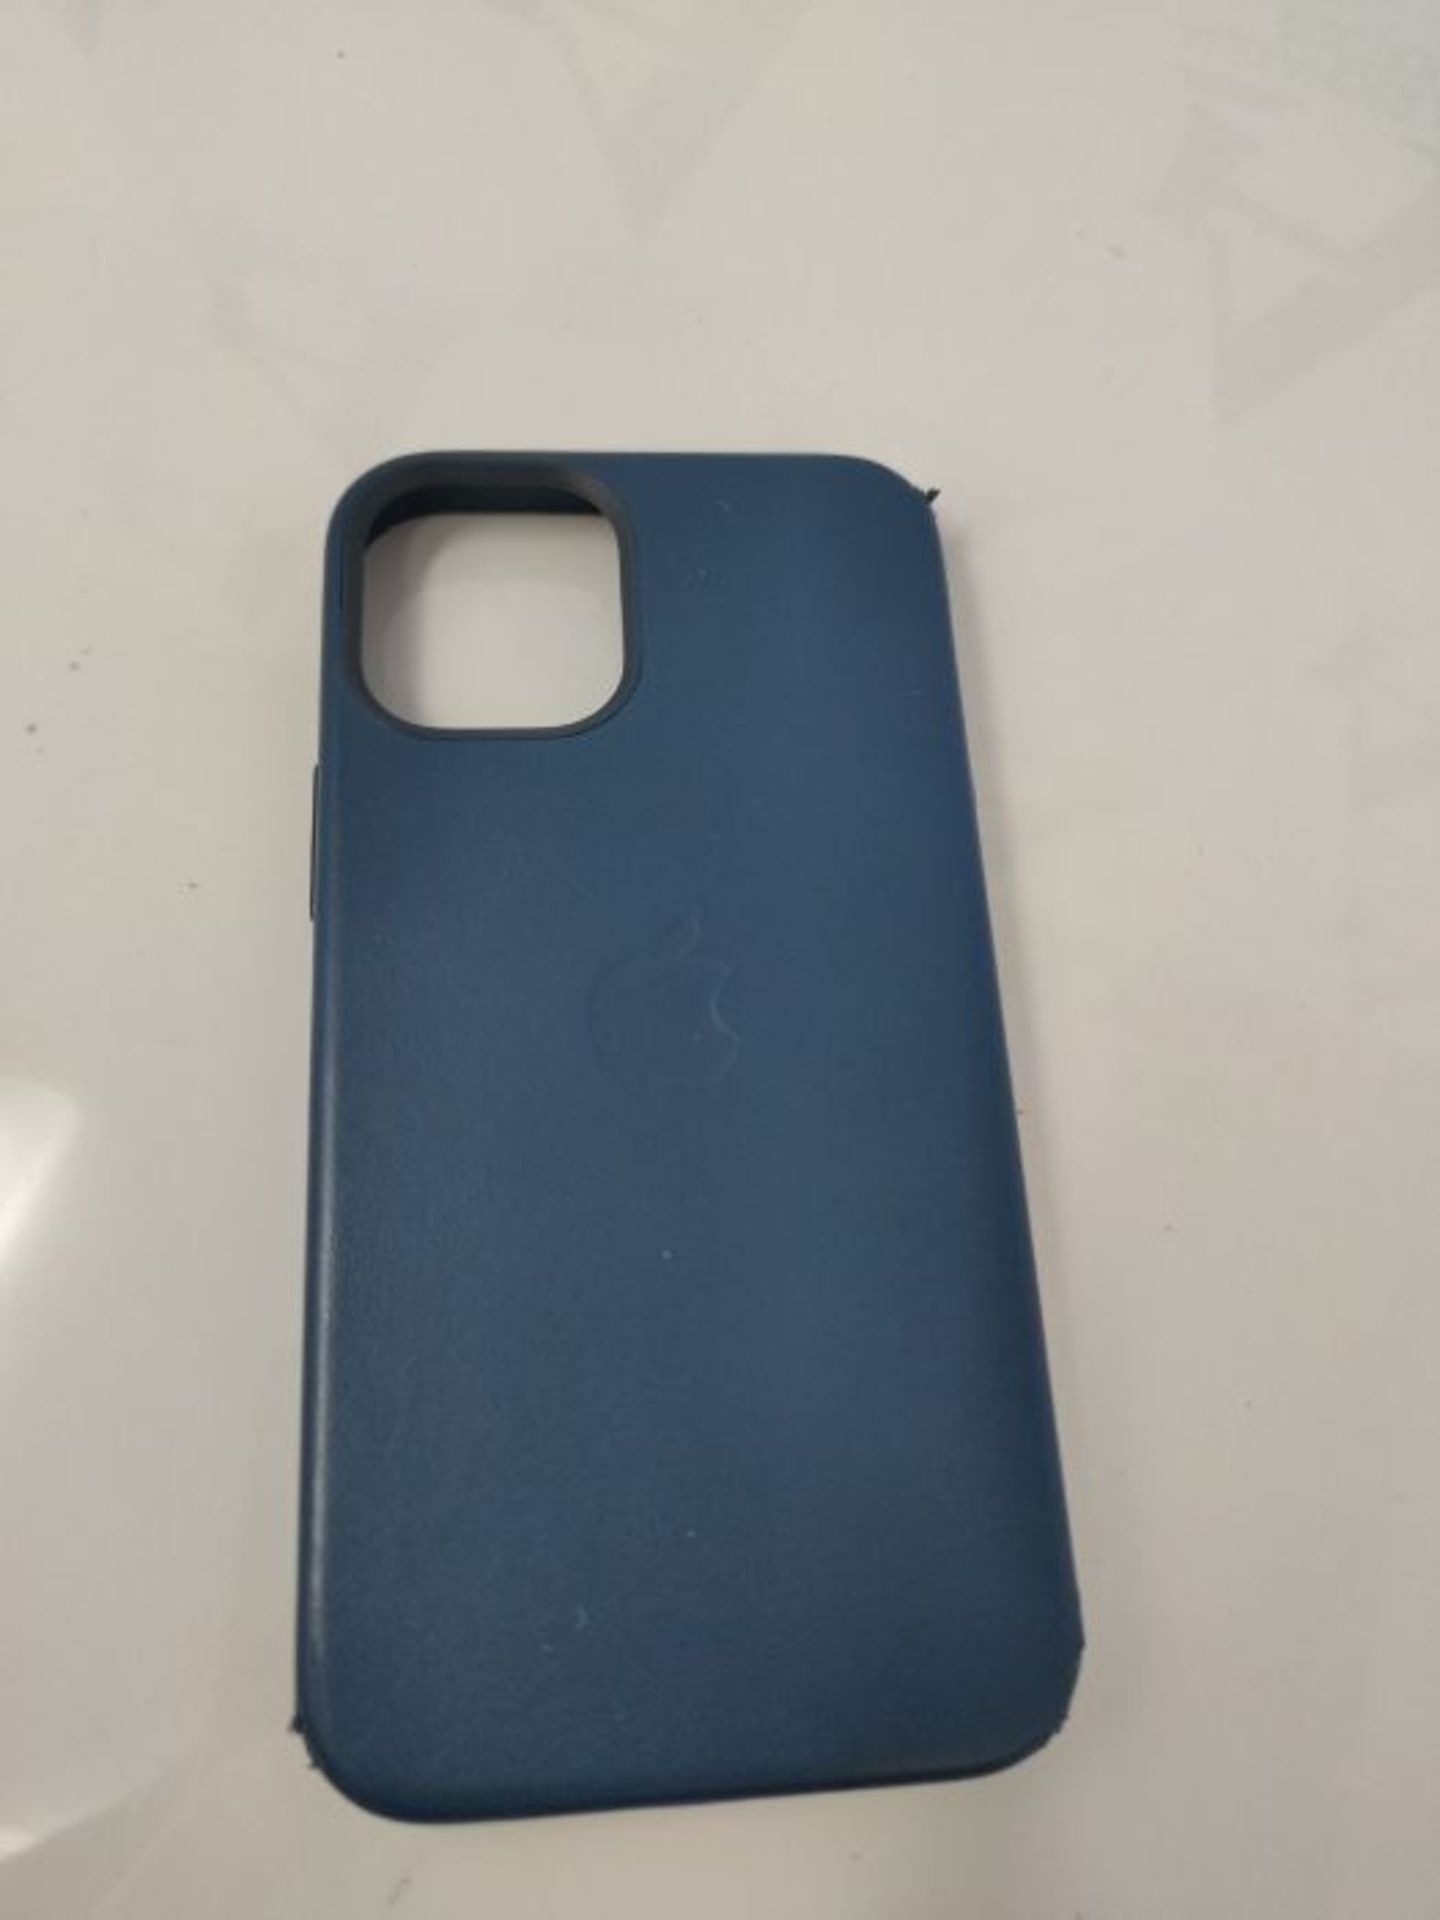 Apple Leather Case with MagSafe (for iPhone 12 mini) - Baltic Blue - Image 3 of 3